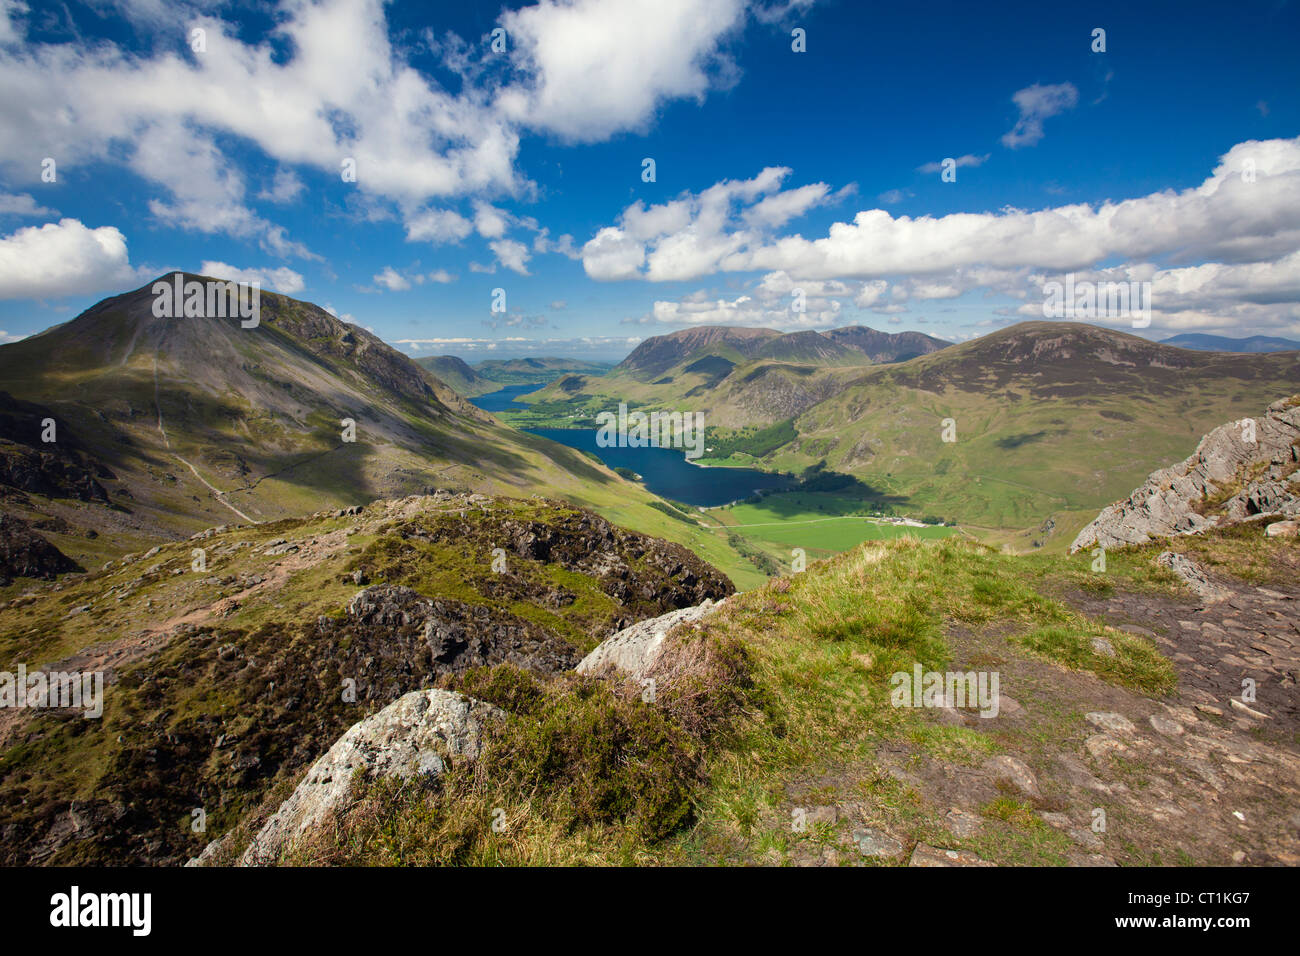 Buttermere Lake Red Pike And Grasmoor Mountains Viewed From Haystacks Mountain, The Lake District Cumbria Lakeland England UK Stock Photo